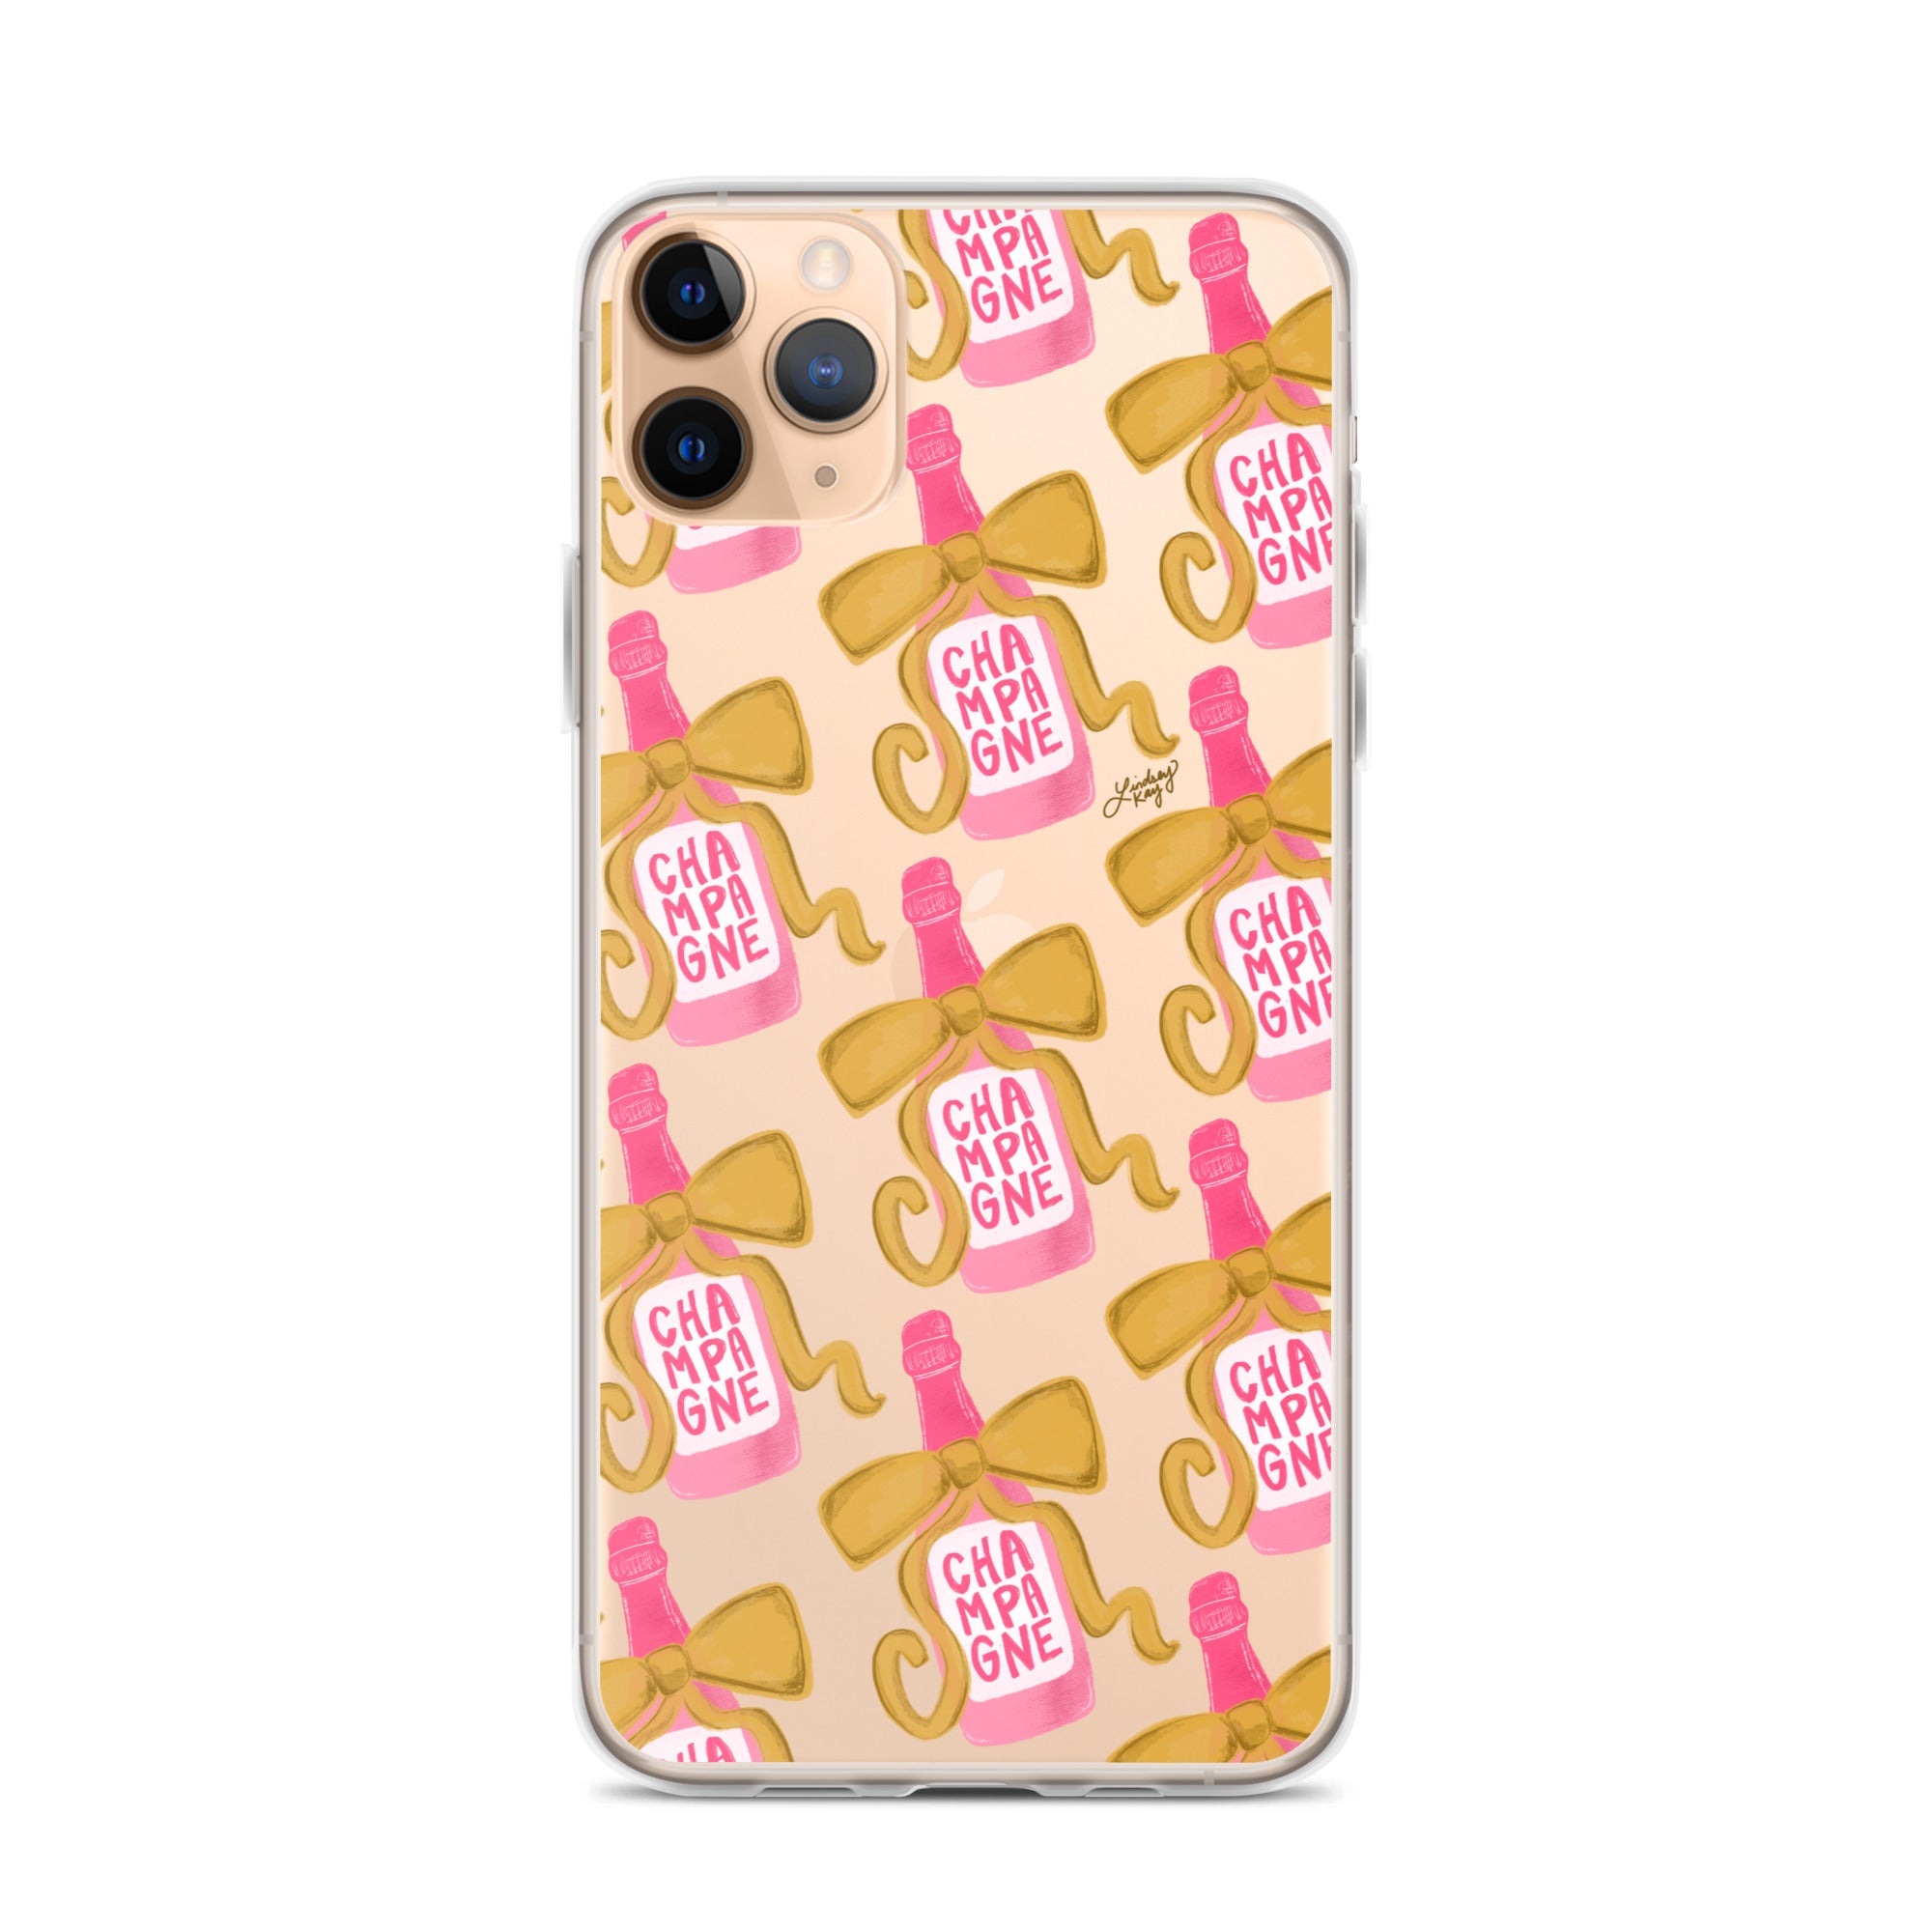 ribbon champagne bottles illustration pink gold iphone-15 iphone case cover tough durable shock-proof cute trendy bow feminine lindsey kay collective wine